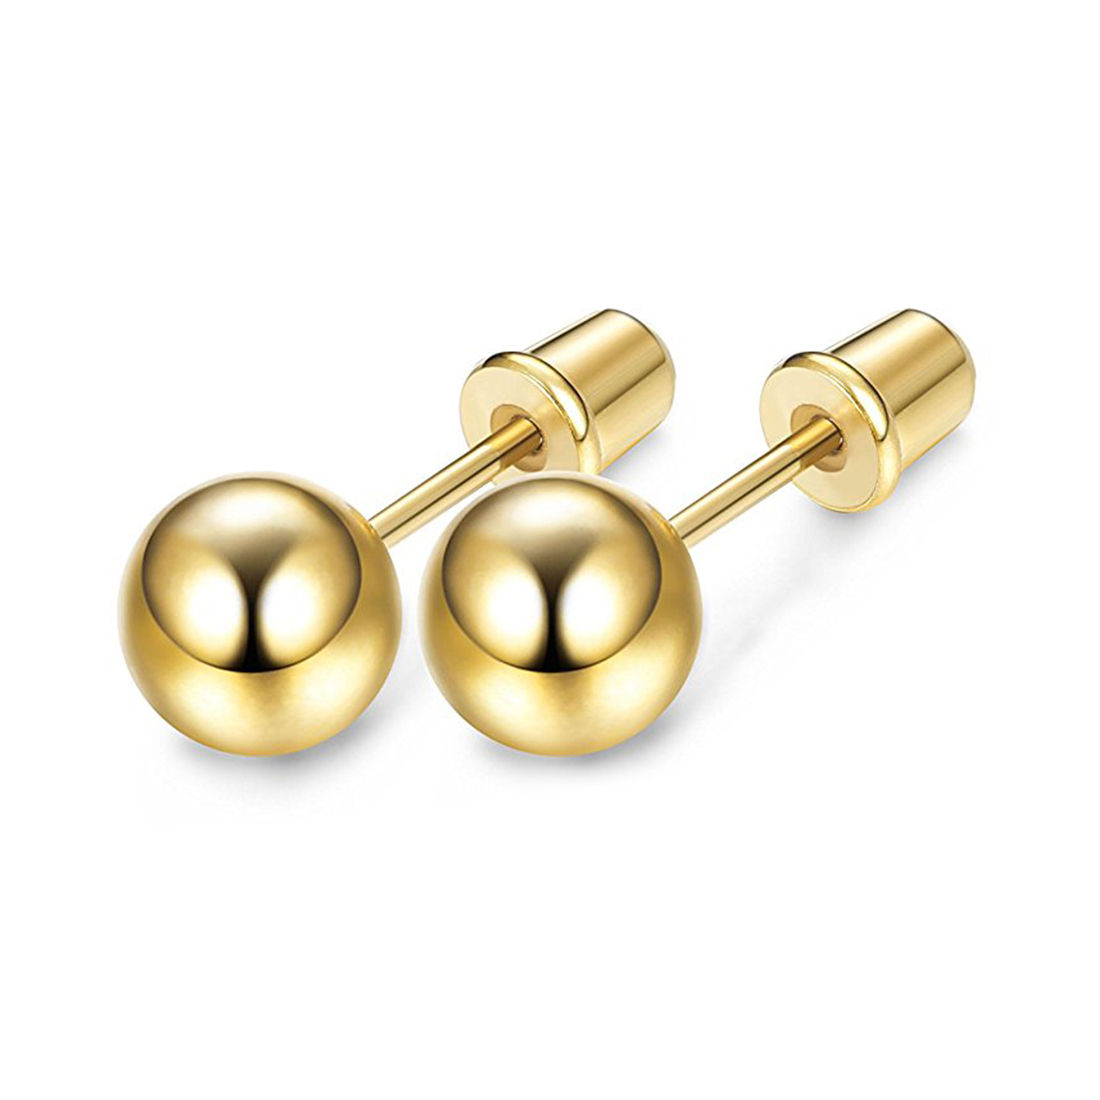 Discover 72+ gold plated ball earrings latest - esthdonghoadian